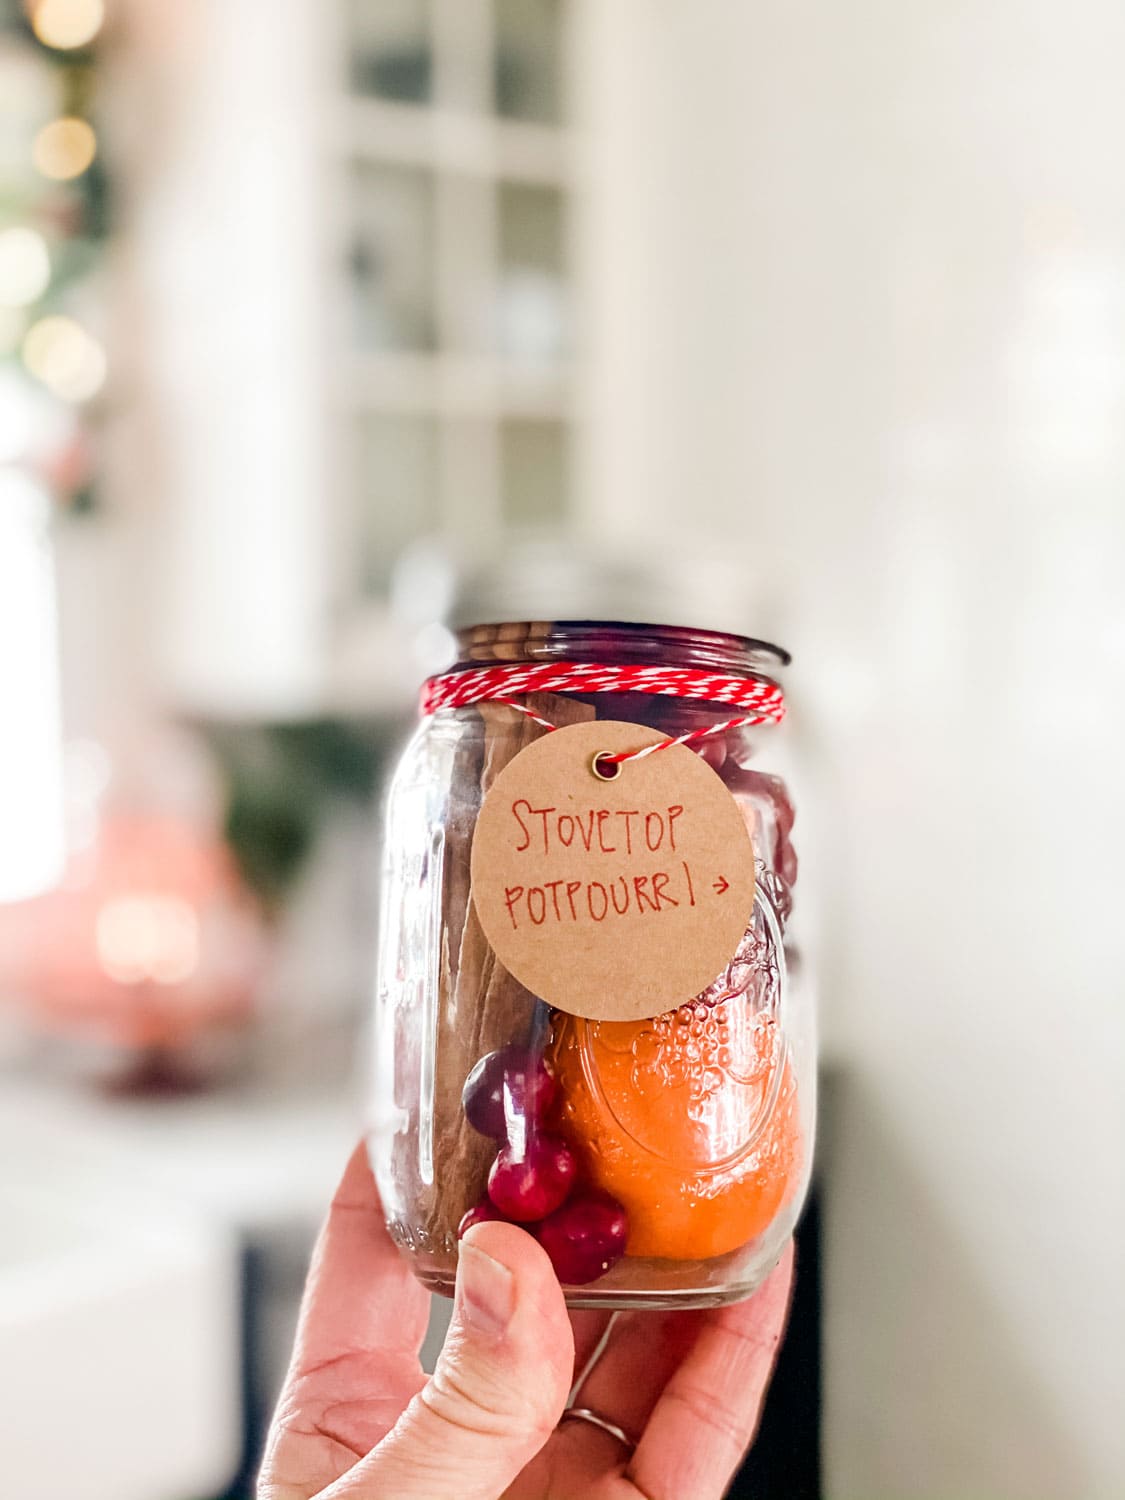 Lifestyle Blogger Annie Diamond shares the recipe and packaging from Sheri Silver on making Stovetop Citrus Potpourri.